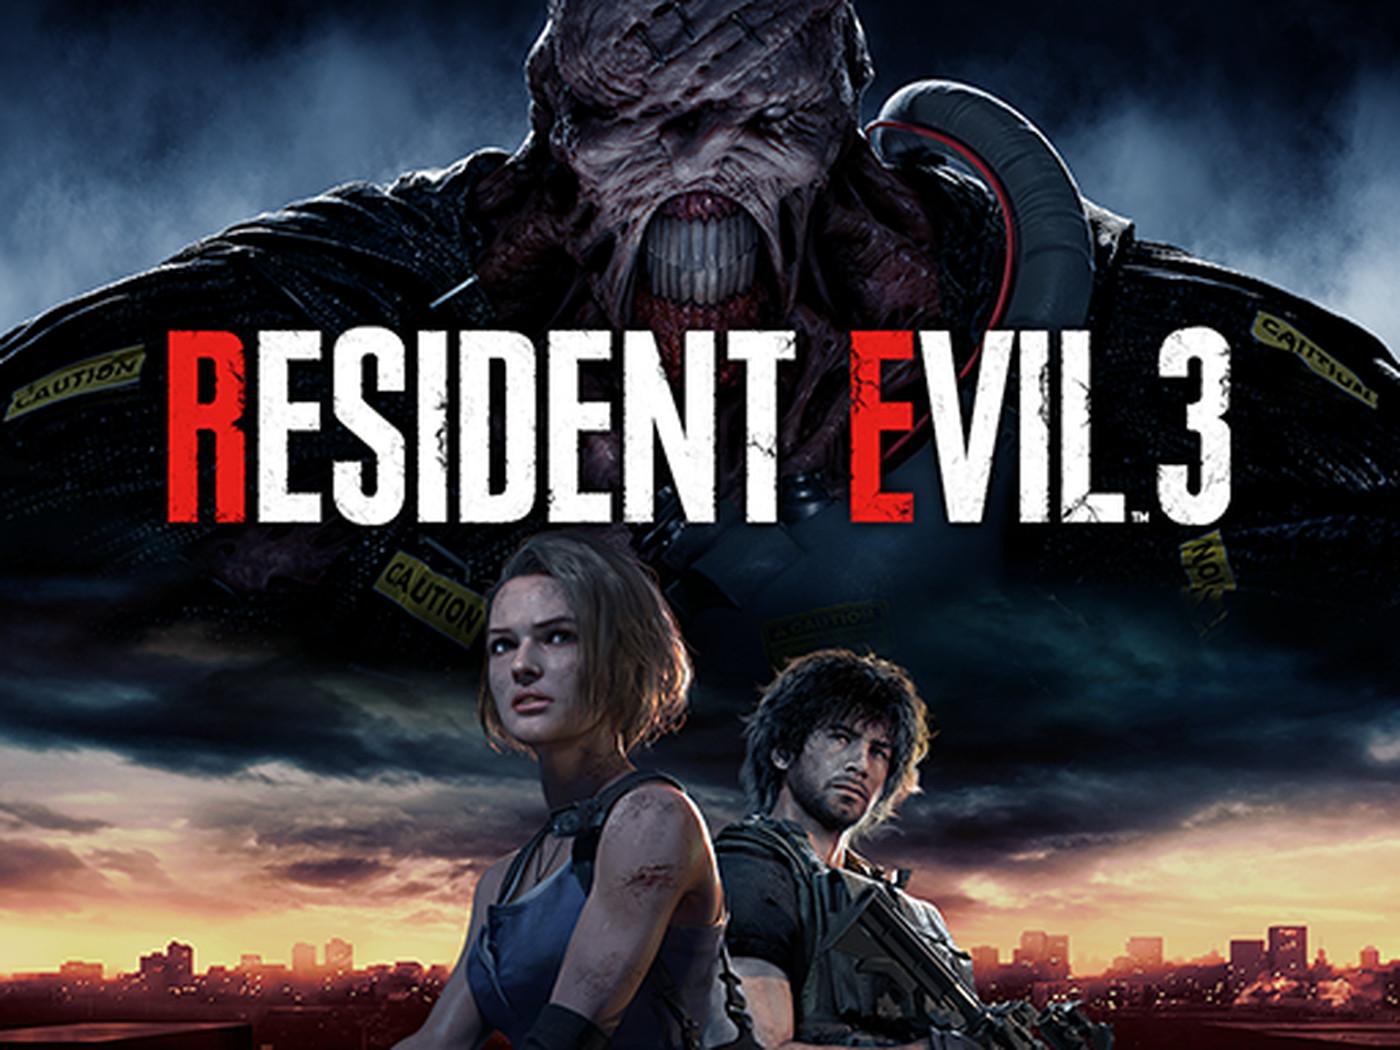 Resident Evil 3 Remake on the way, leaked on the PlayStation